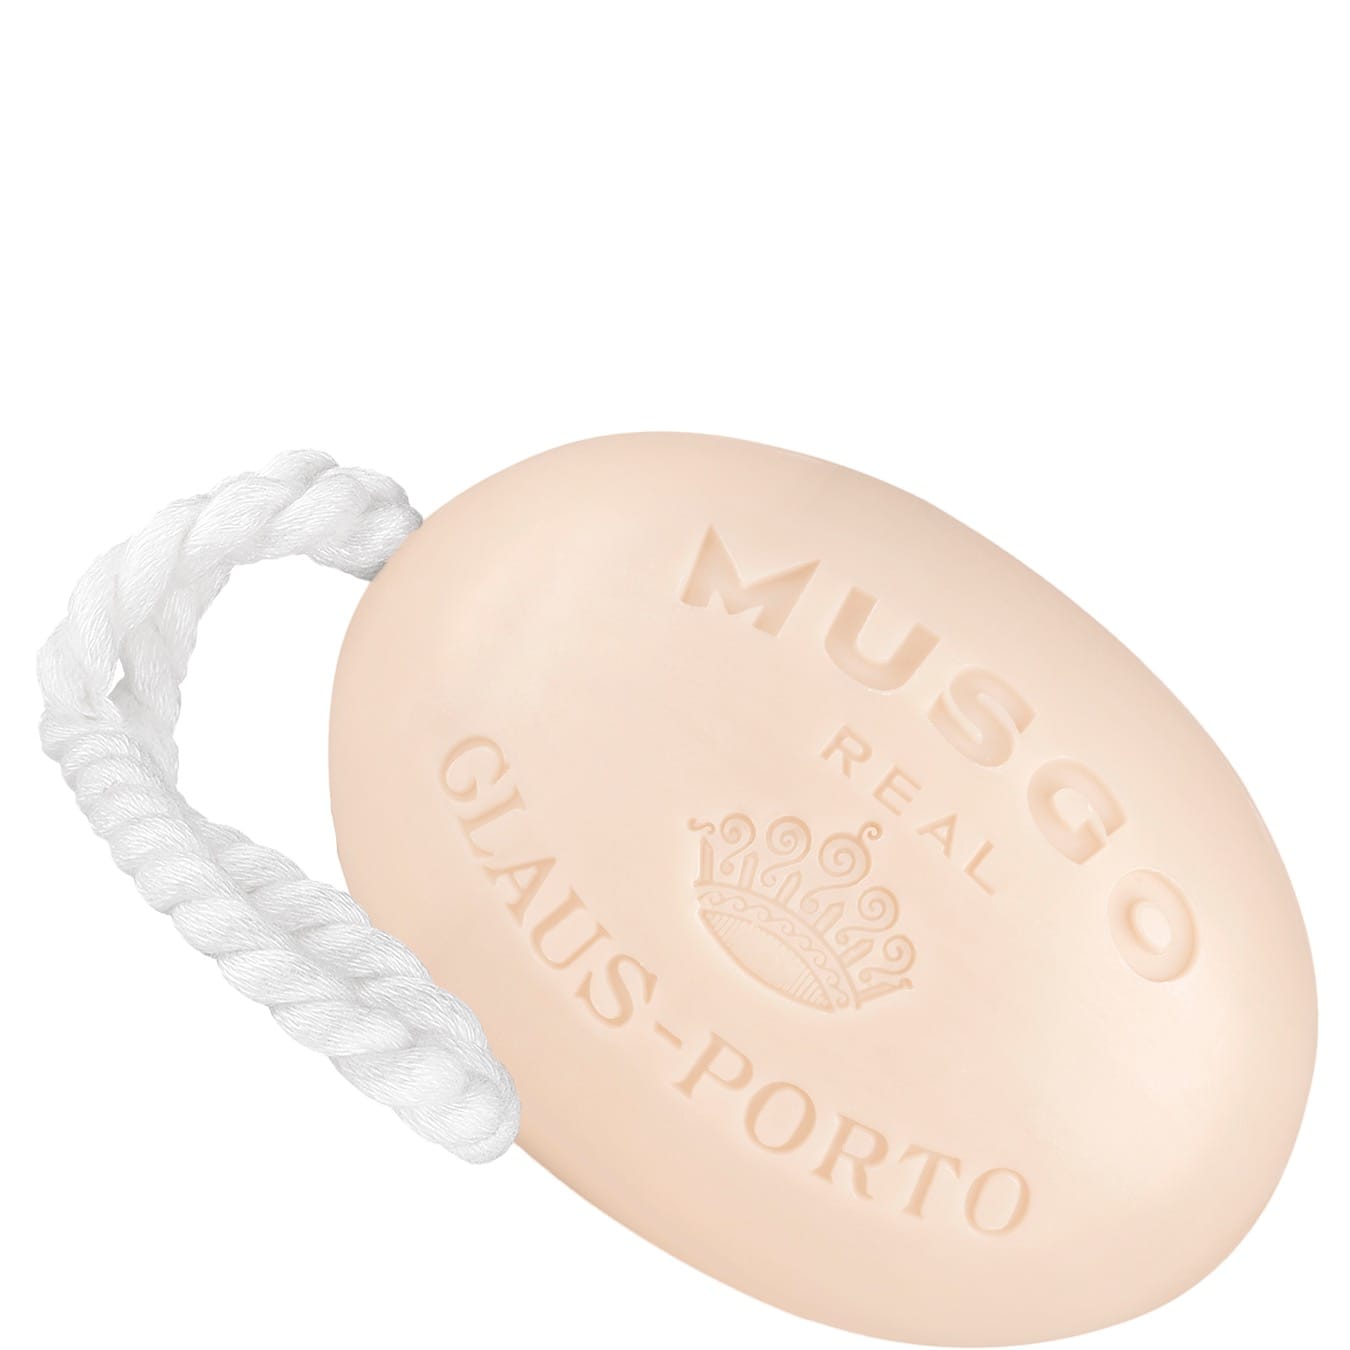 Musgo Real Soap on a Rope Orange Amber 190gr - 1.2 - MR-199CC001